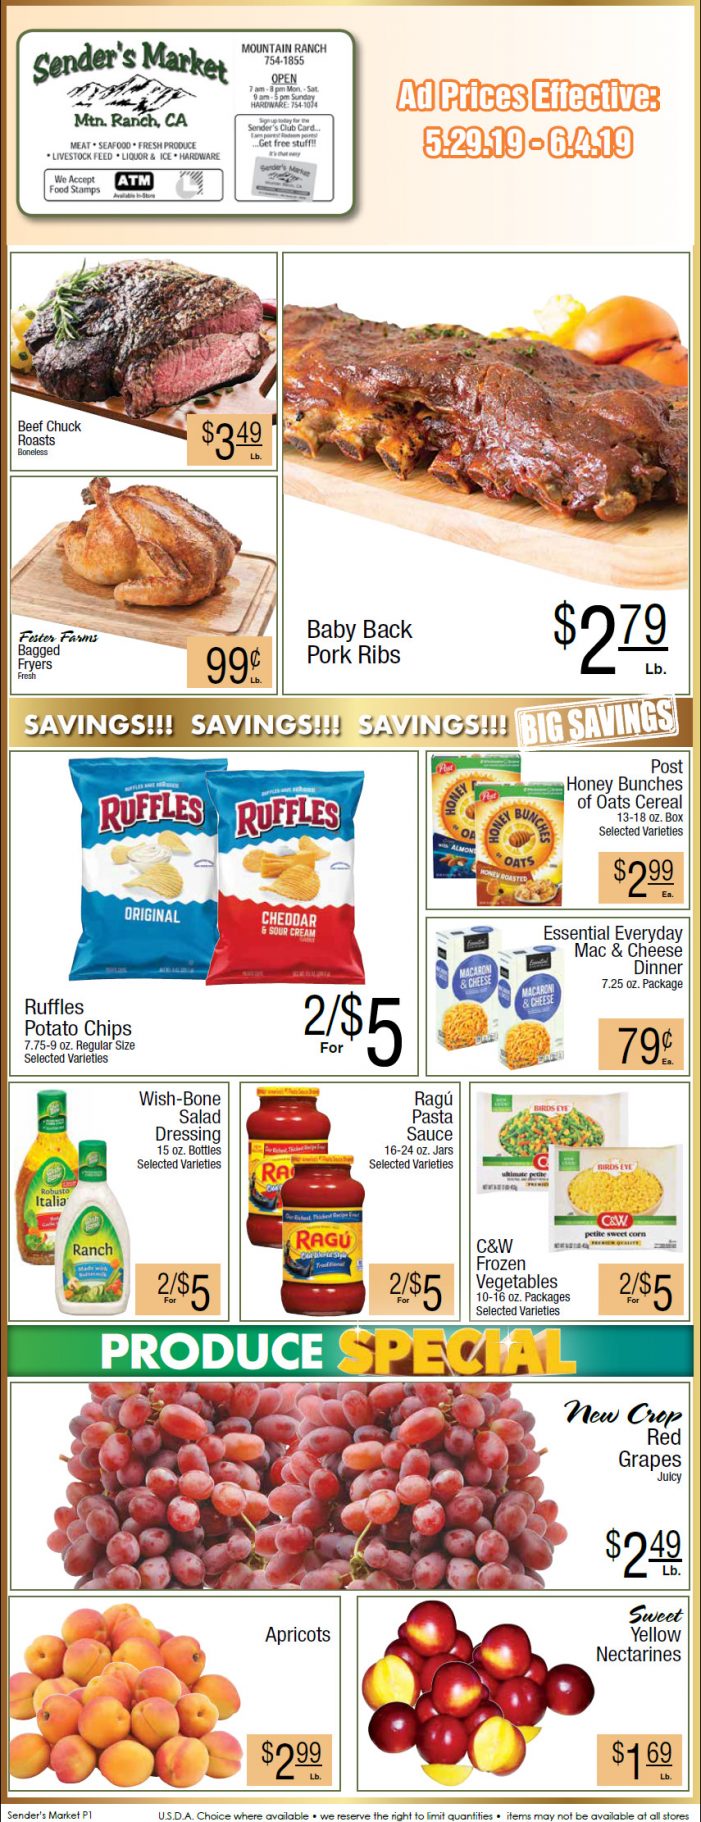 Sender’s Market Weekly Ad & Grocery Specials Through June 4